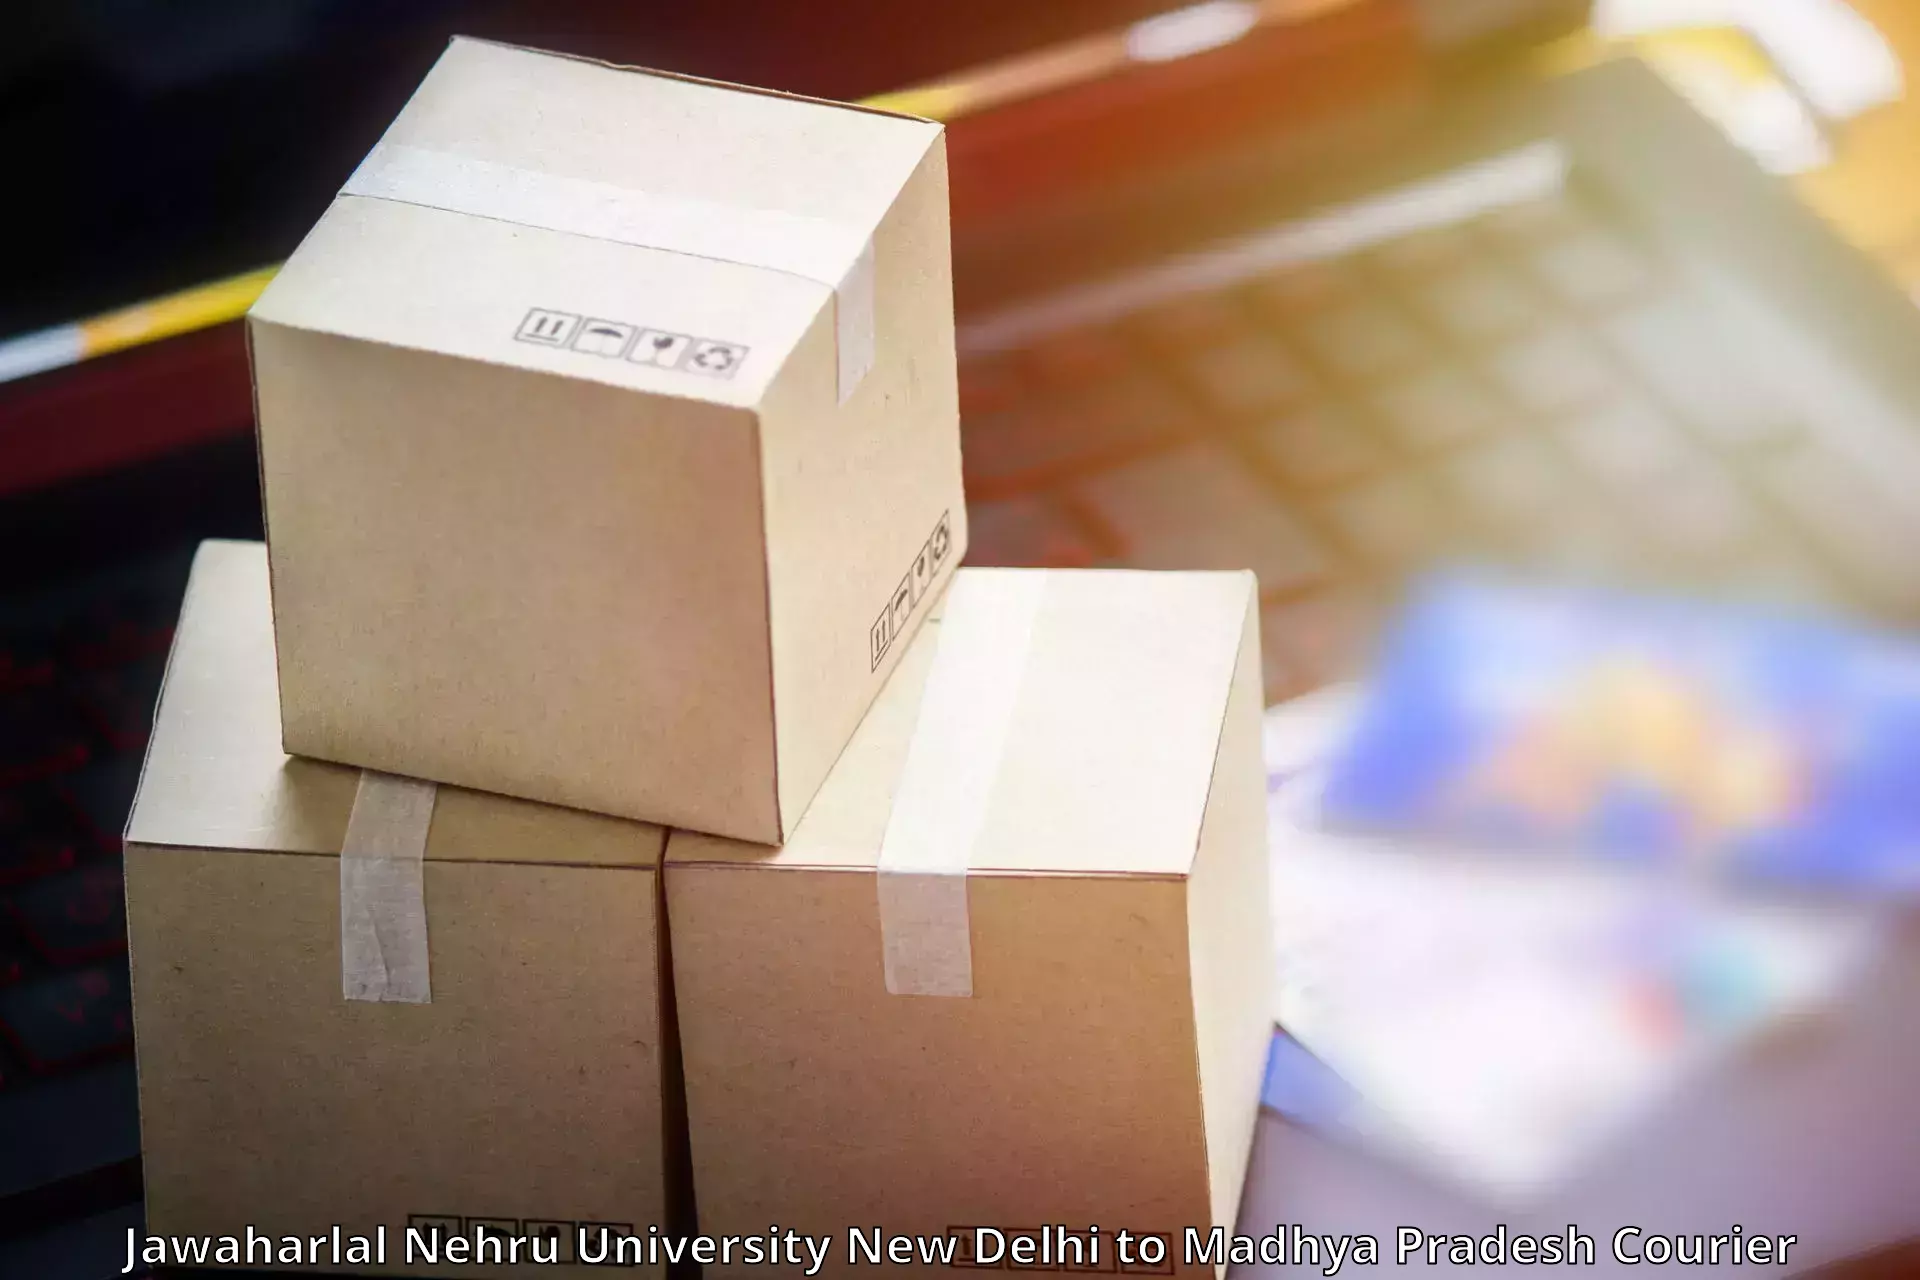 Personalized courier experiences Jawaharlal Nehru University New Delhi to Bhopal